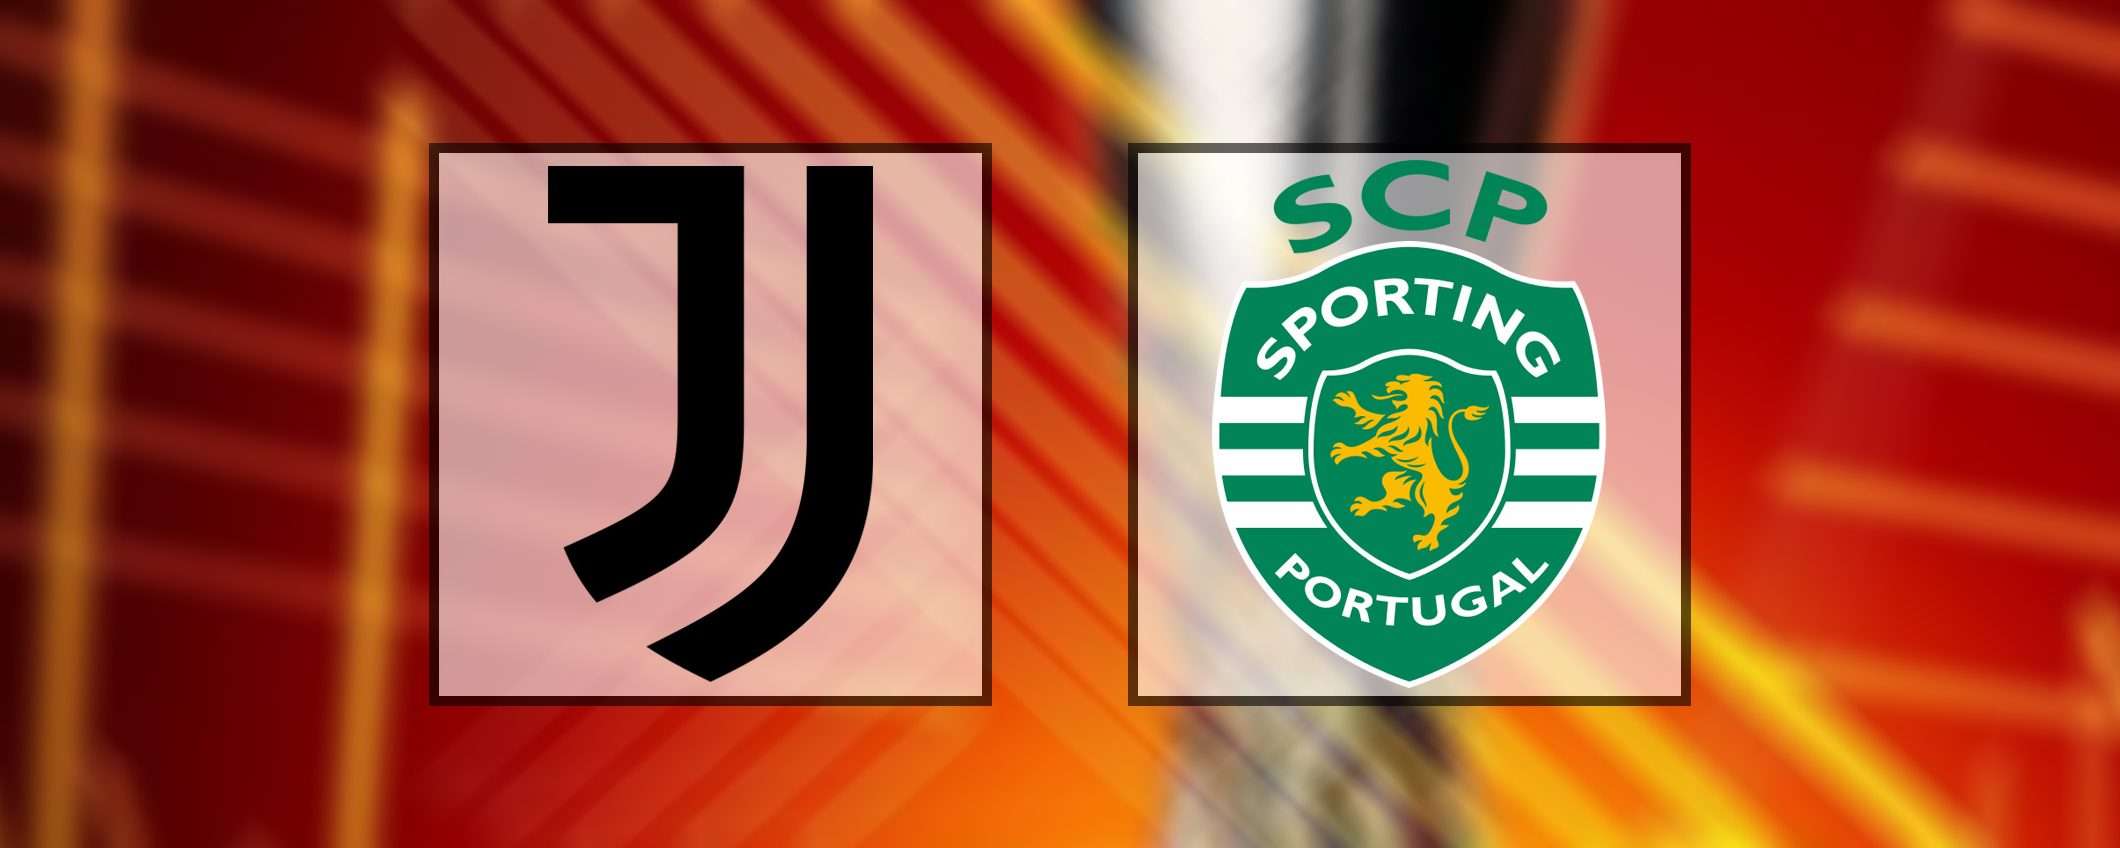 Come vedere Juventus-Sporting in streaming gratis